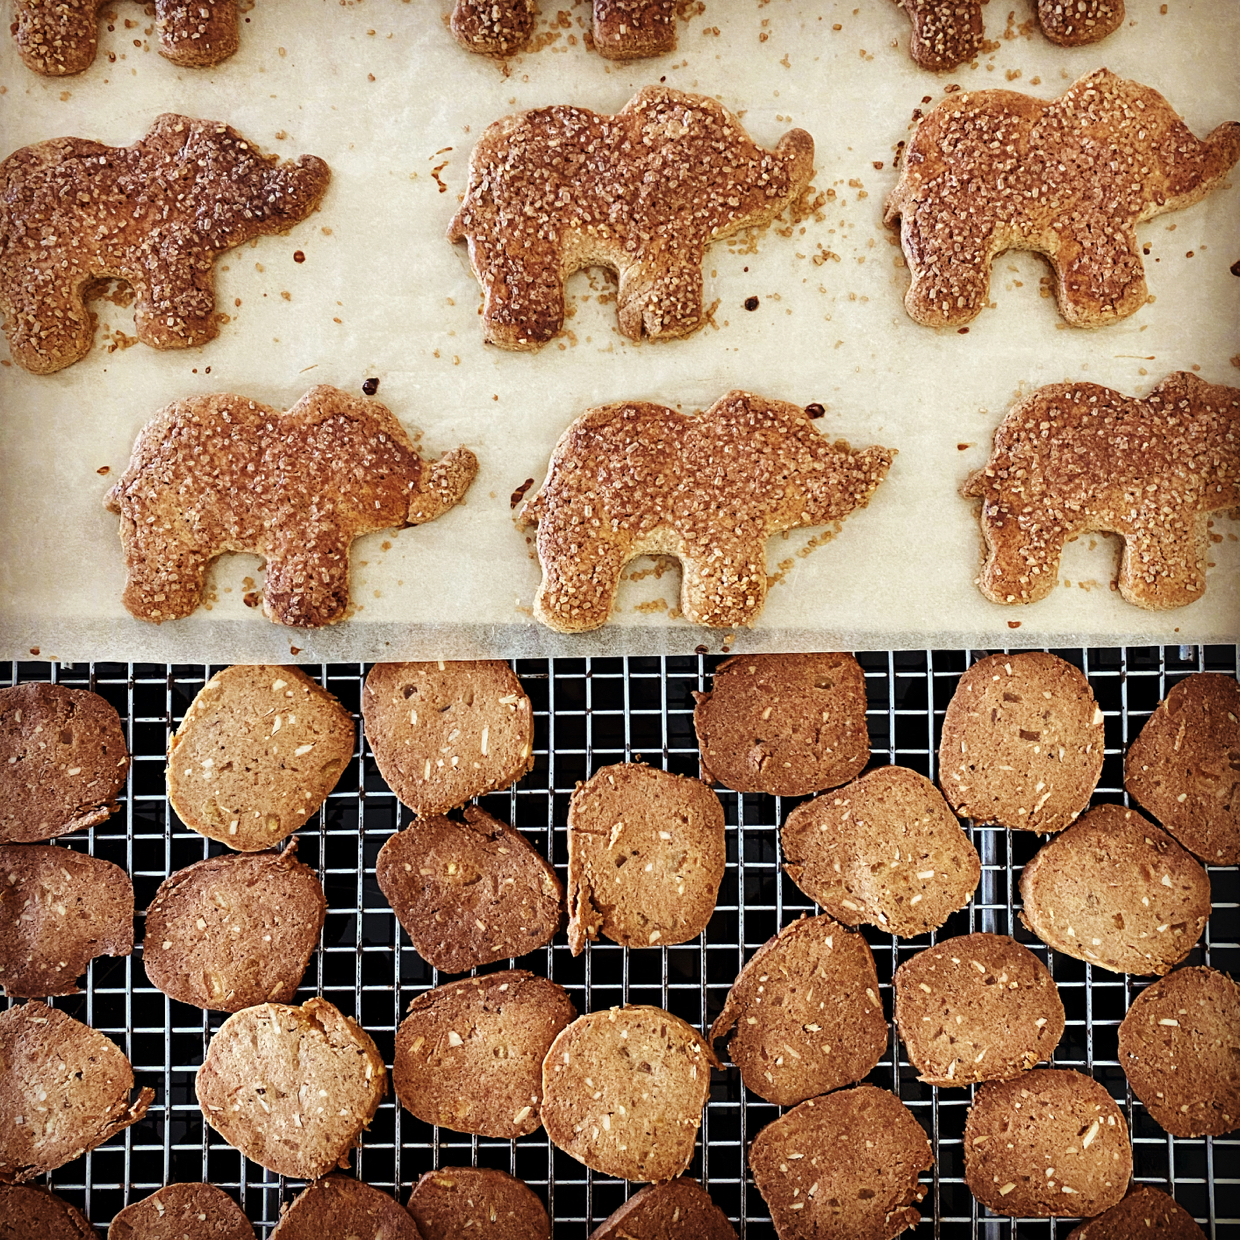 Elephant shaped biscuits